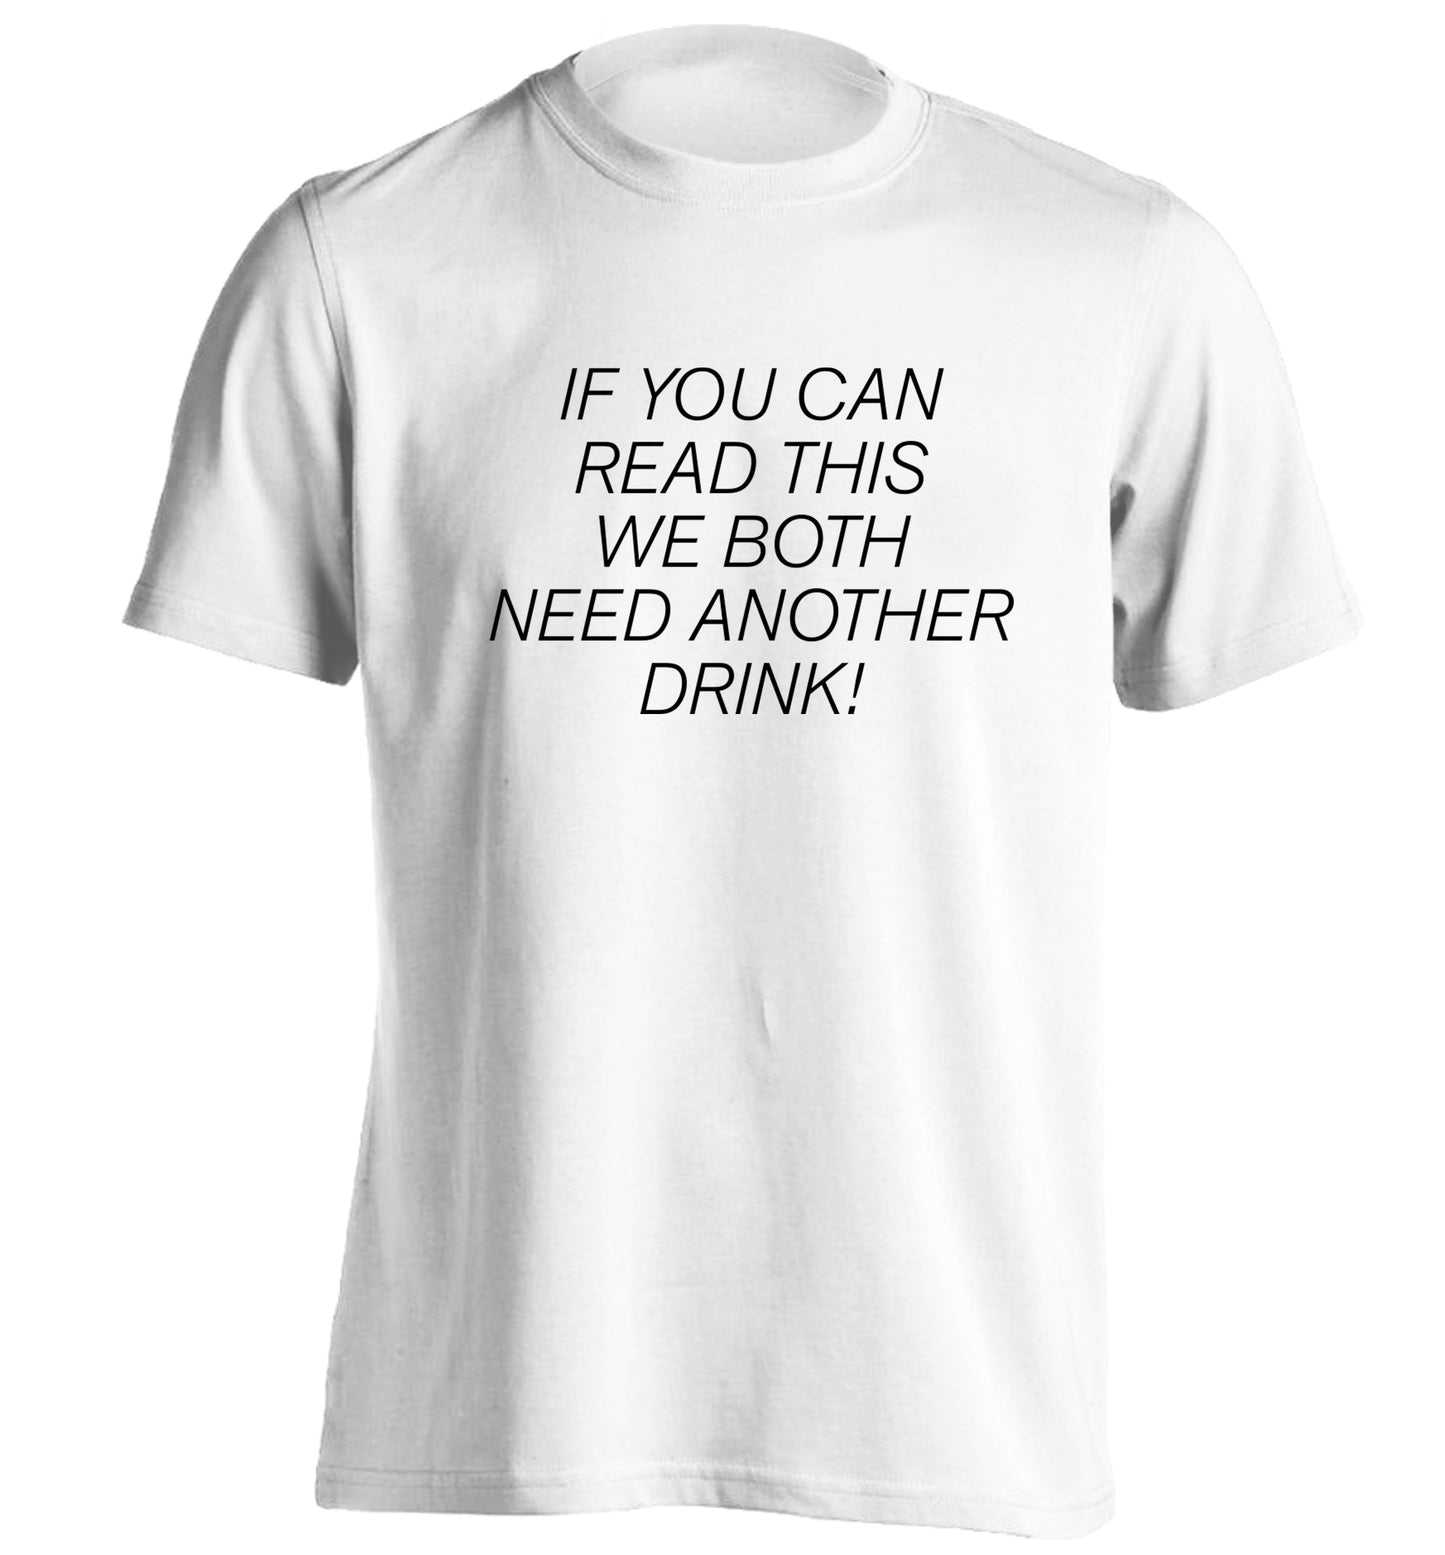 If you can read this we both need another drink! adults unisex white Tshirt 2XL